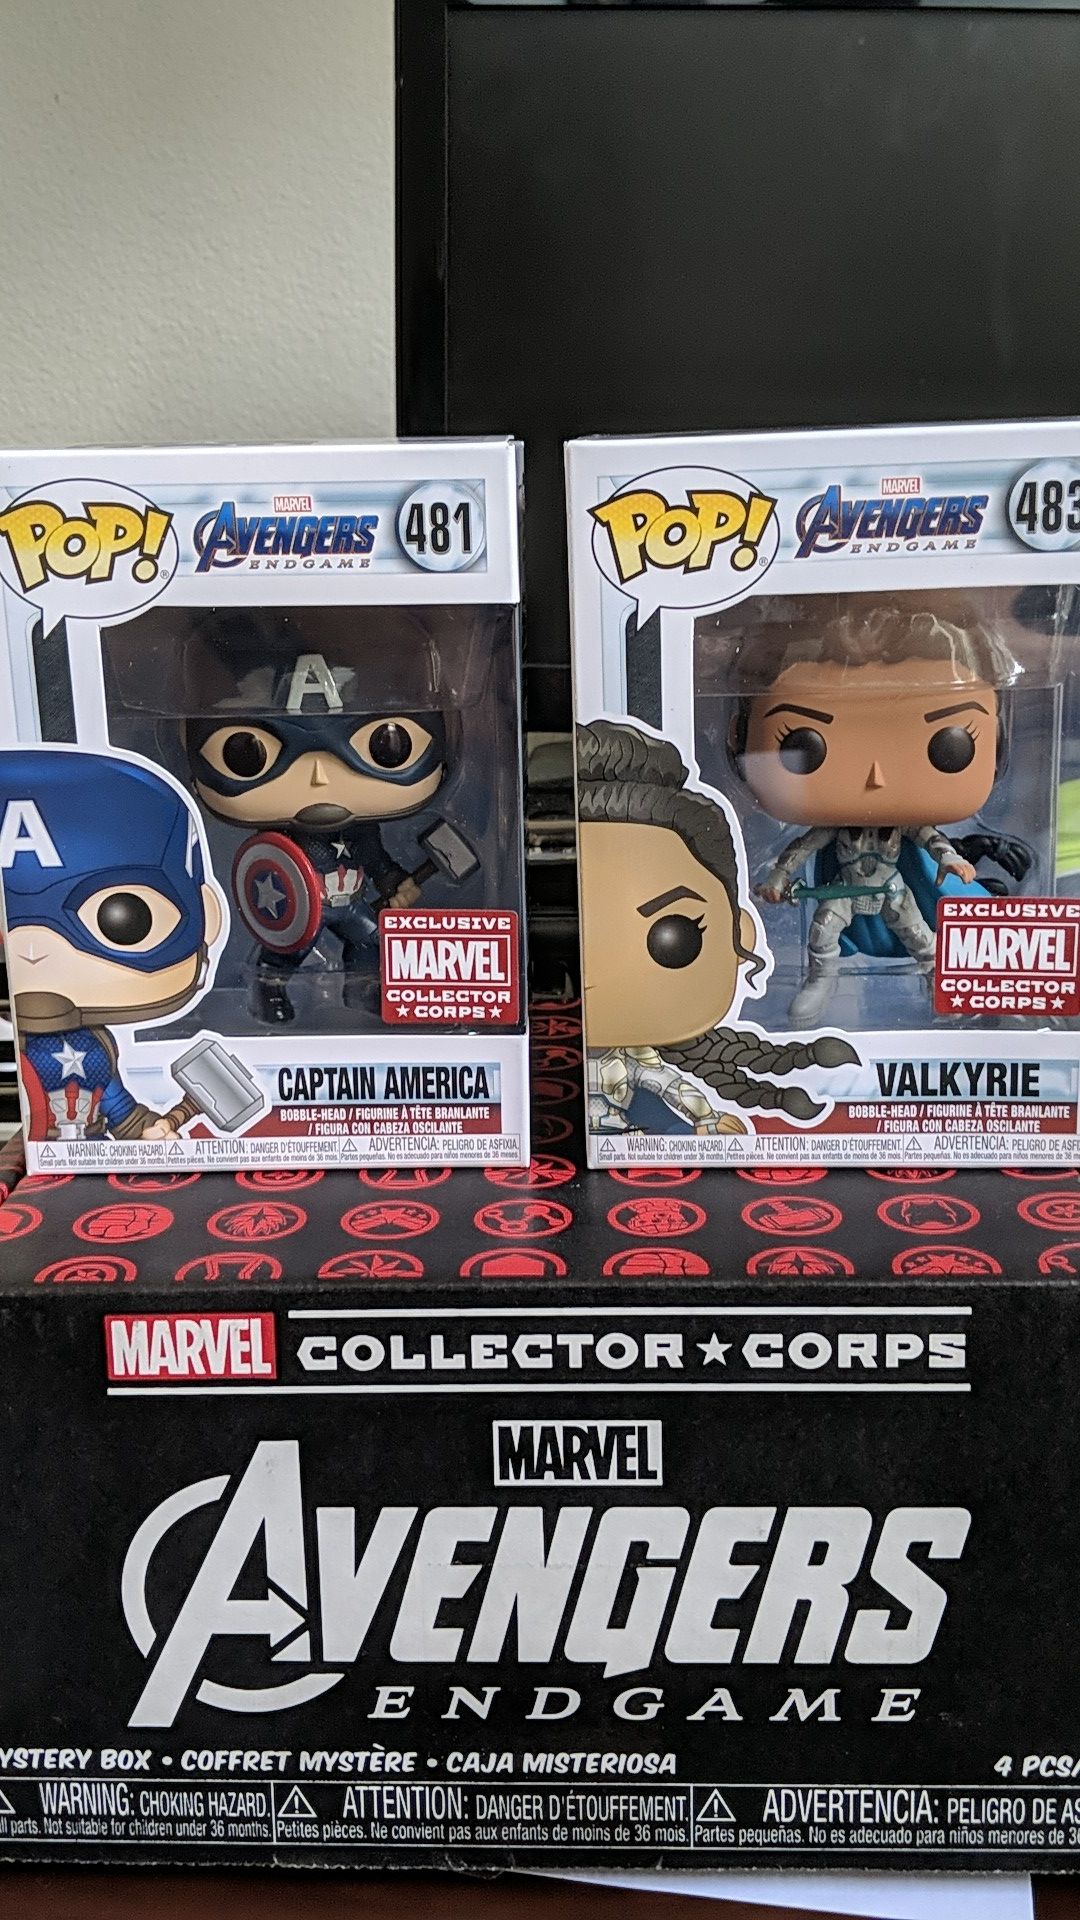 Captain America with Mjolnir and Valkyrie Marvel Collector Corps Exclusives